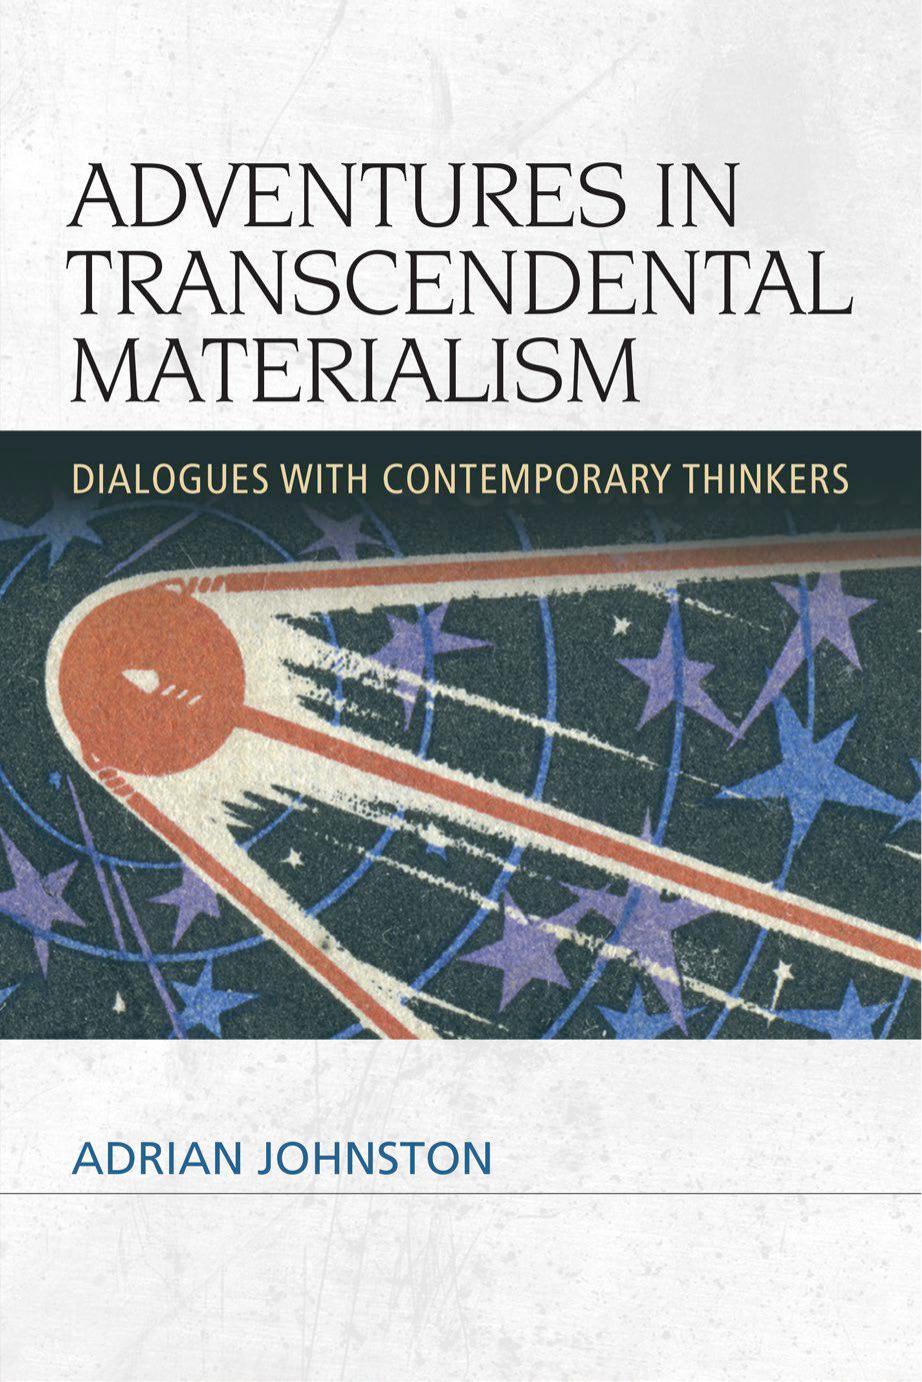 Adventures in Transcendental Materialism: Dialogues With Contemporary Thinkers